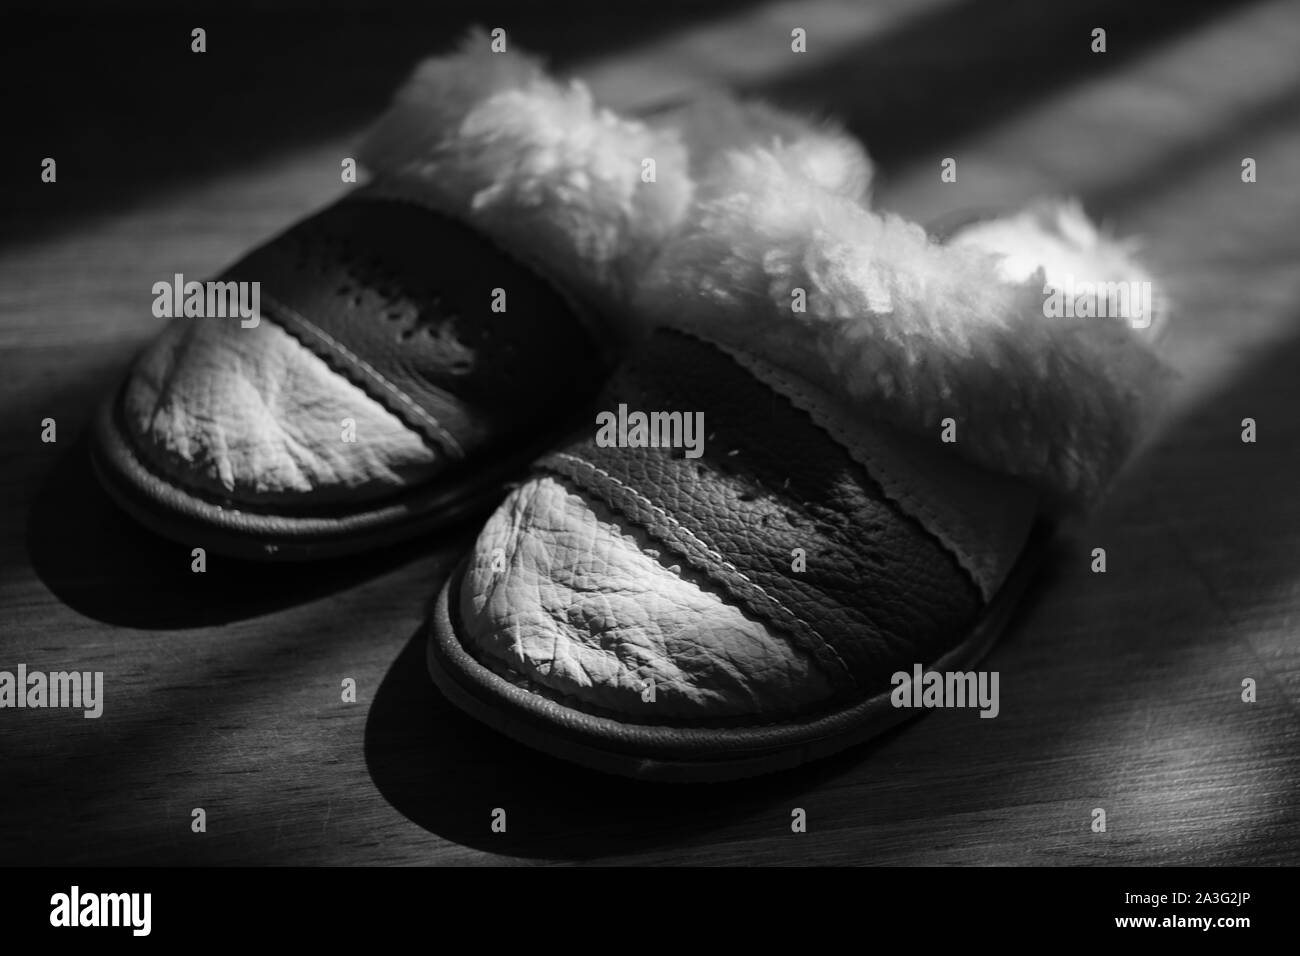 Women's slippers with a sheepskin on a wooden floor. BW photo. Stock Photo